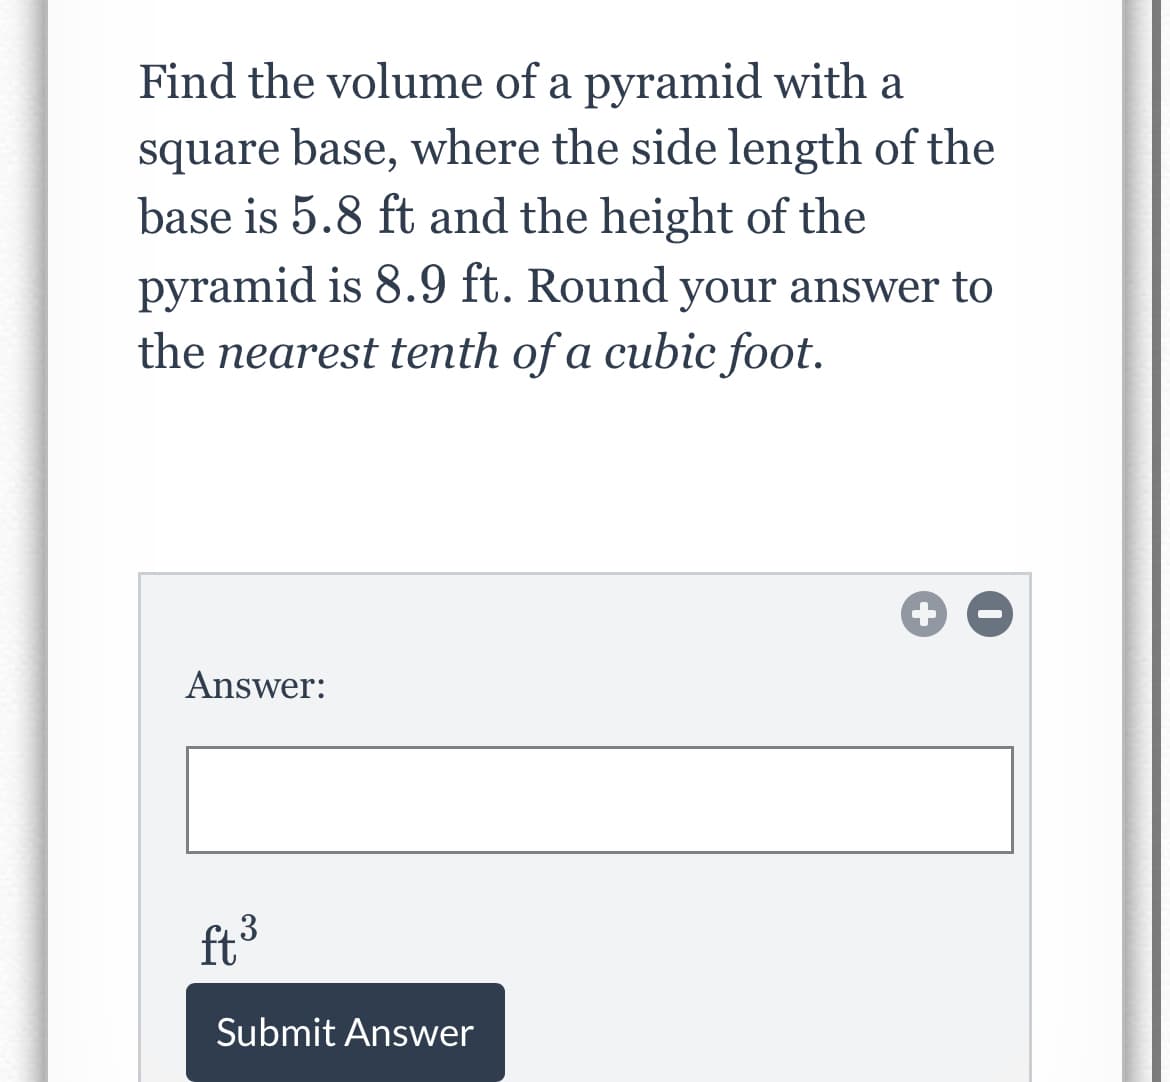 Find the volume of a pyramid with a
square base, where the side length of the
base is 5.8 ft and the height of the
pyramid is 8.9 ft. Round your answer to
the nearest tenth of a cubic foot.
Answer:
ft3
Submit Answer
